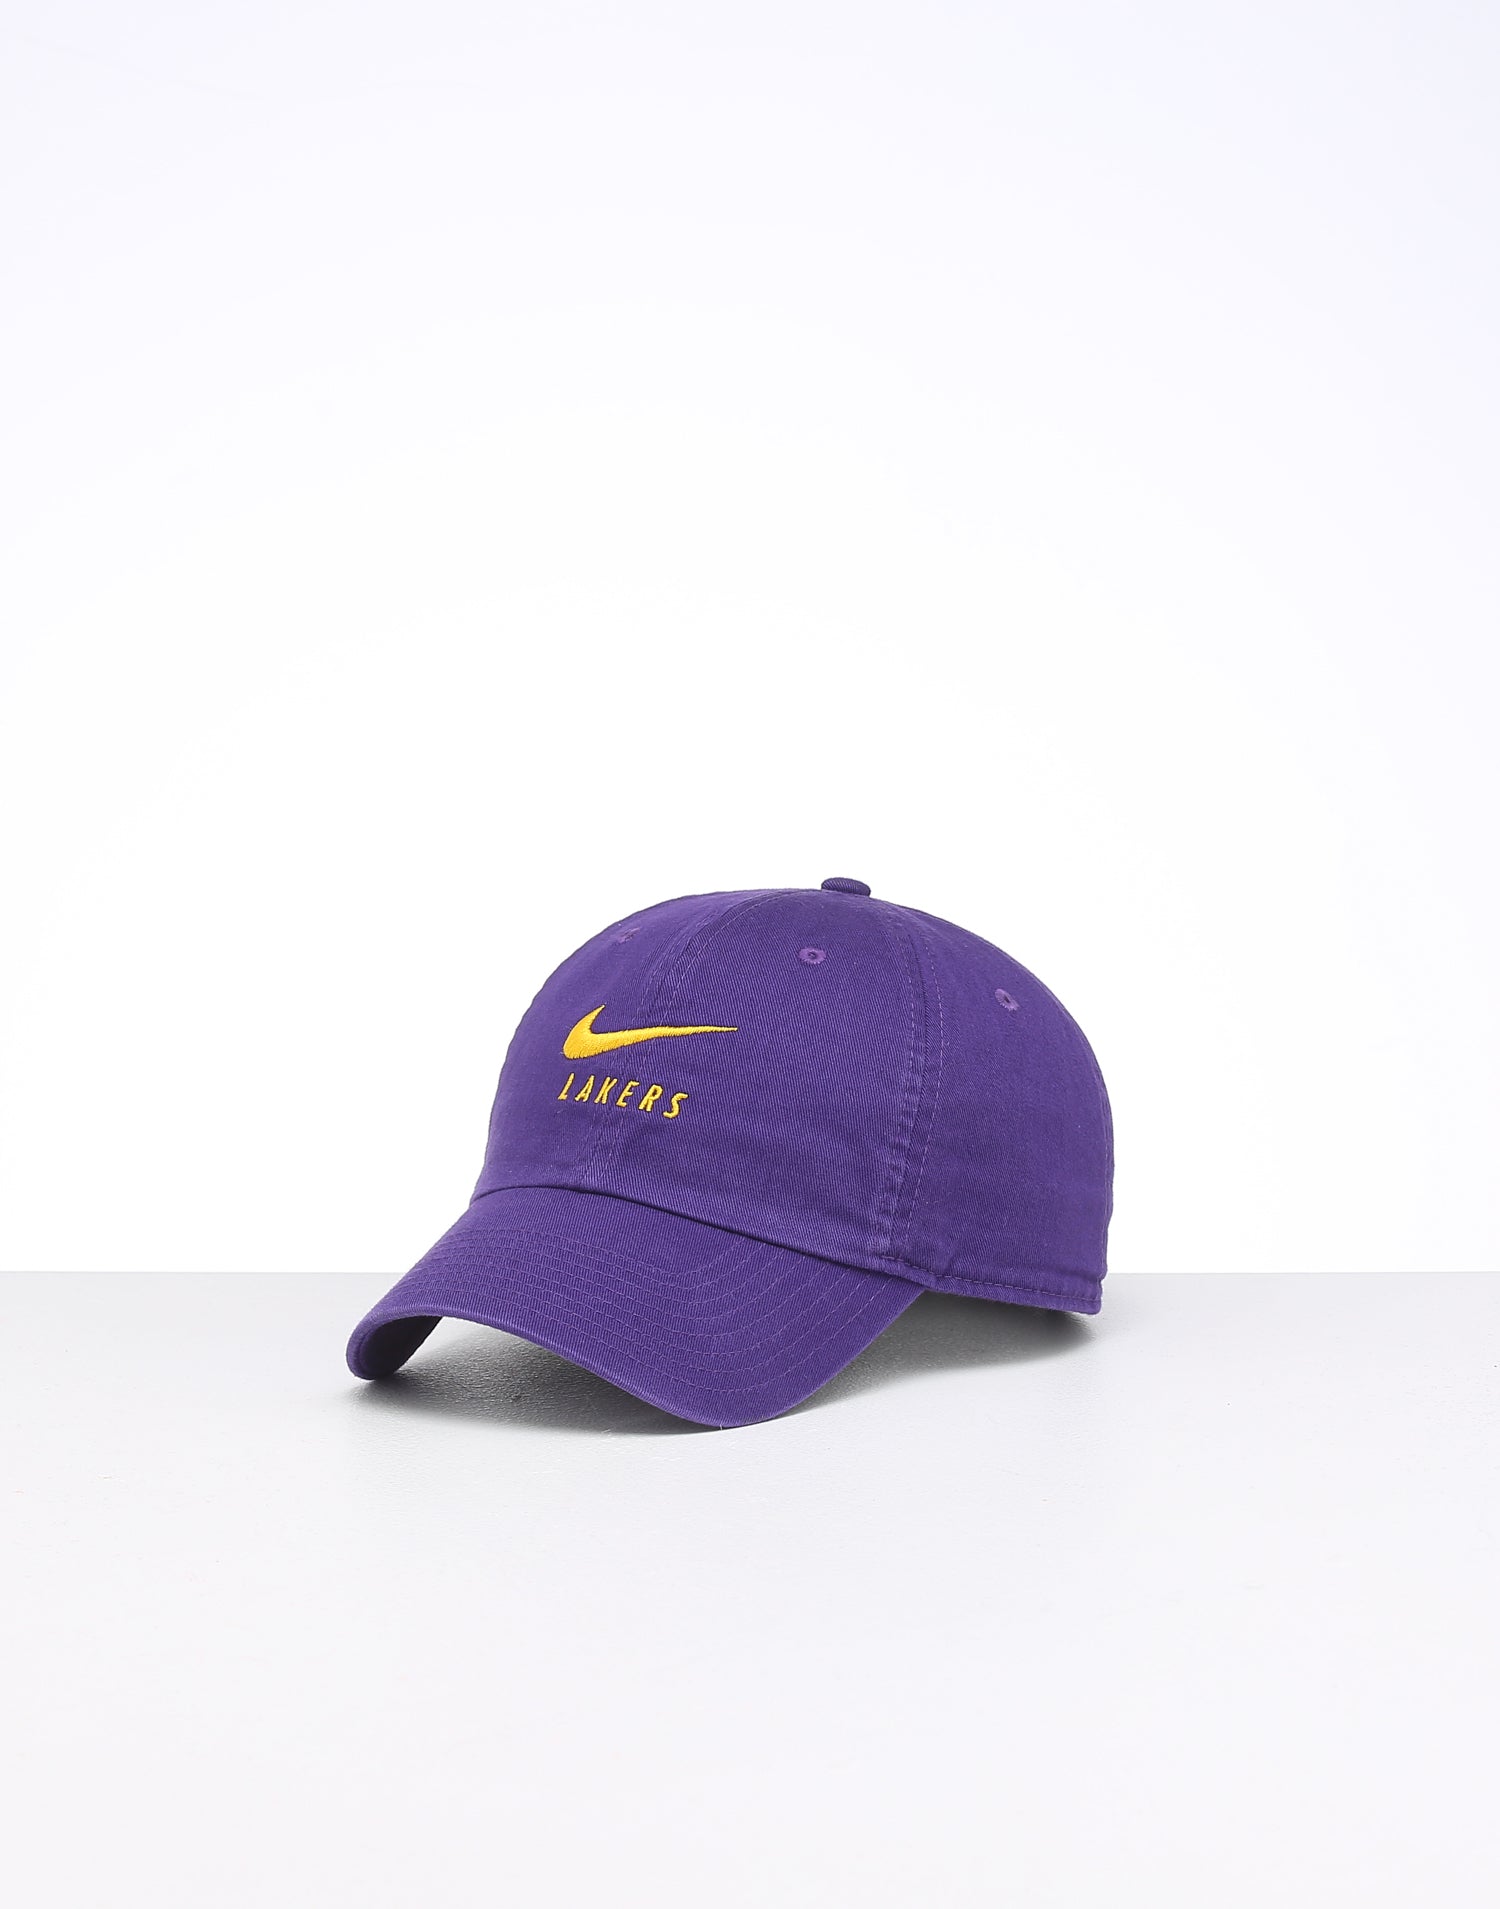 lakers heritage 86 hat